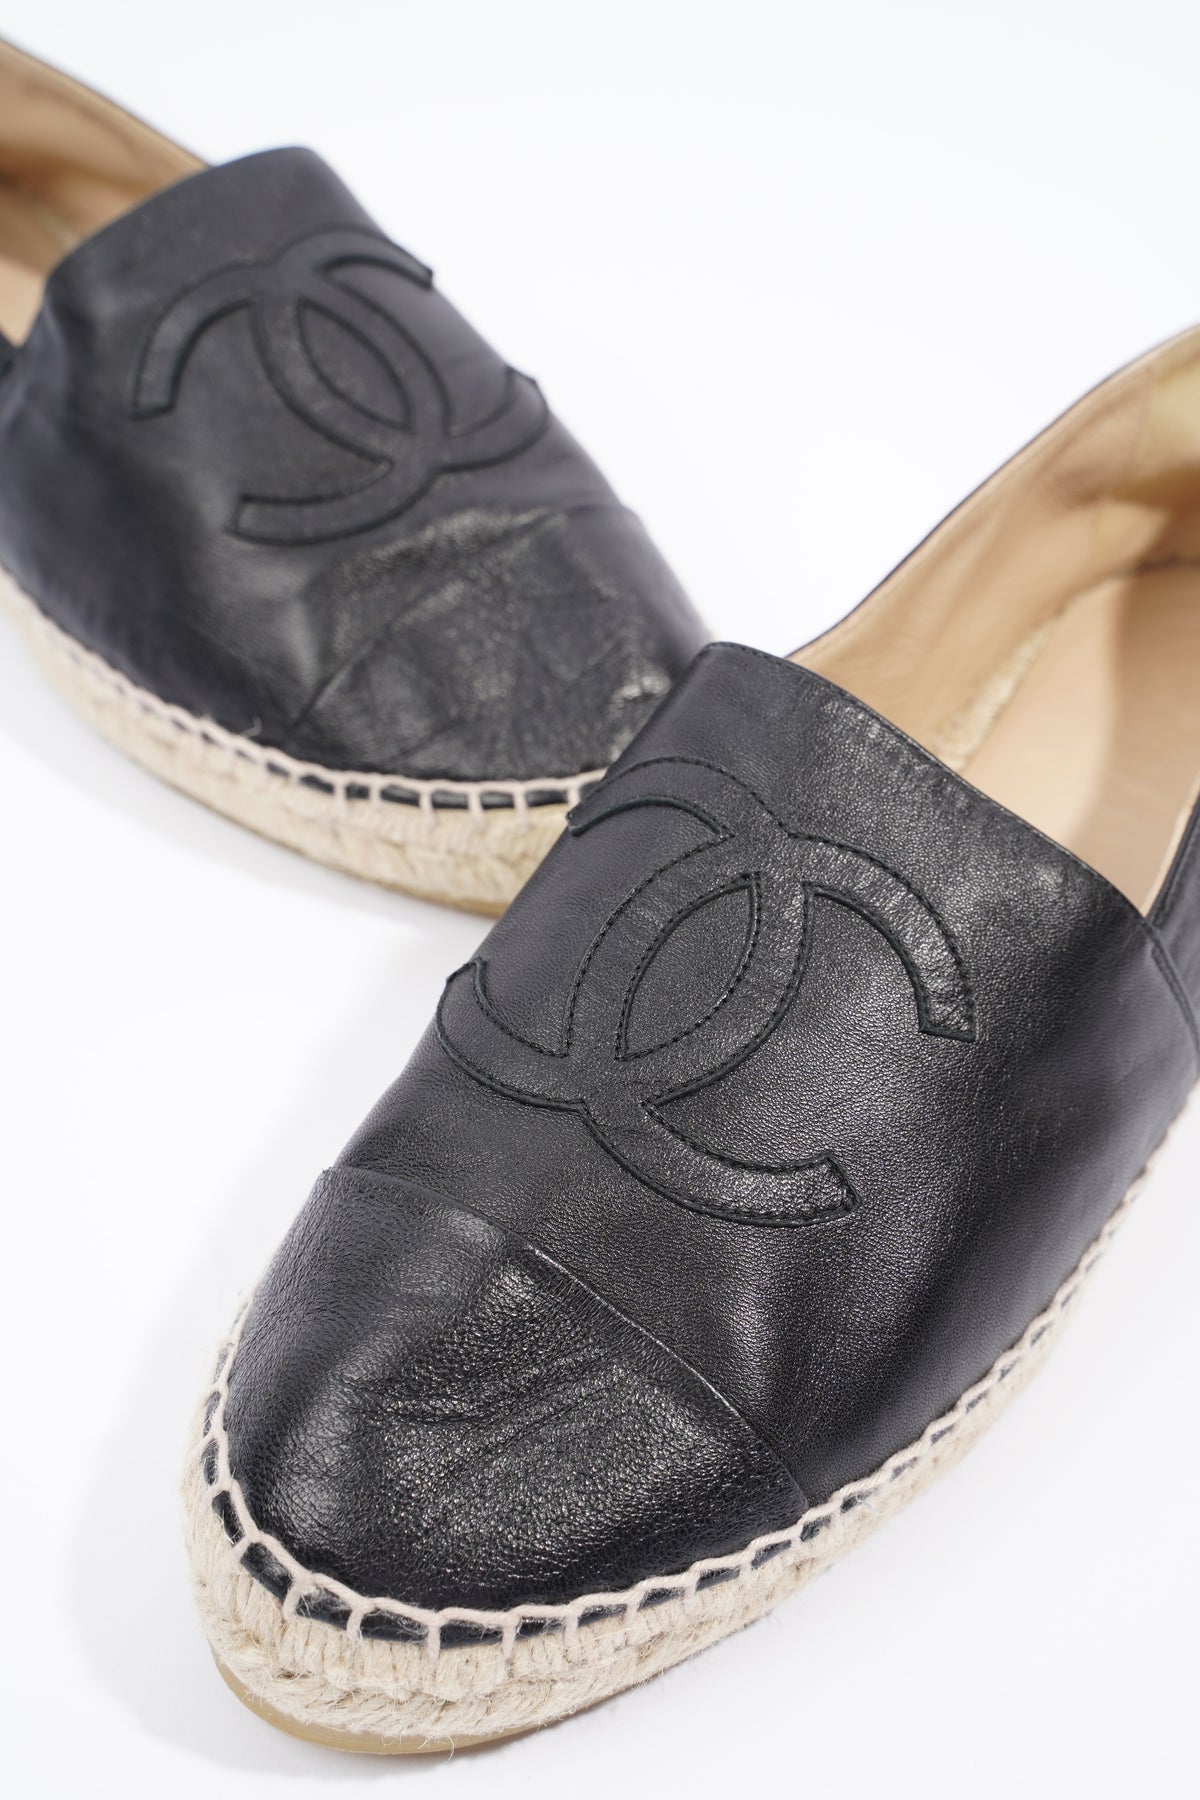 Chanel Womens Espadrilles Black Leather EU 41 / UK 8 – Luxe Collective